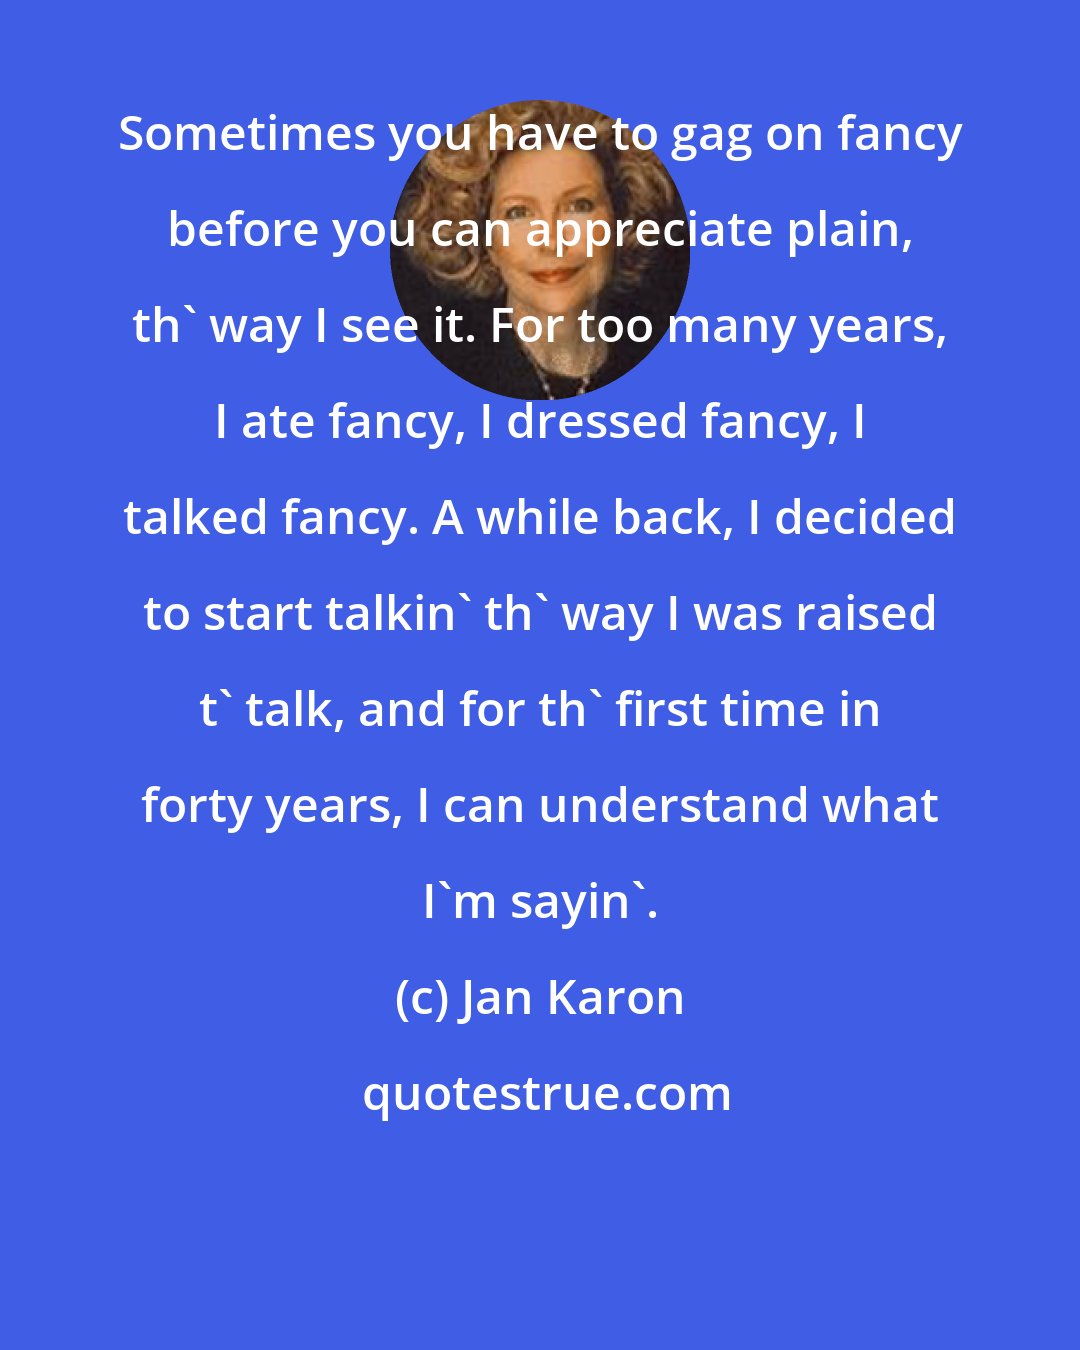 Jan Karon: Sometimes you have to gag on fancy before you can appreciate plain, th' way I see it. For too many years, I ate fancy, I dressed fancy, I talked fancy. A while back, I decided to start talkin' th' way I was raised t' talk, and for th' first time in forty years, I can understand what I'm sayin'.